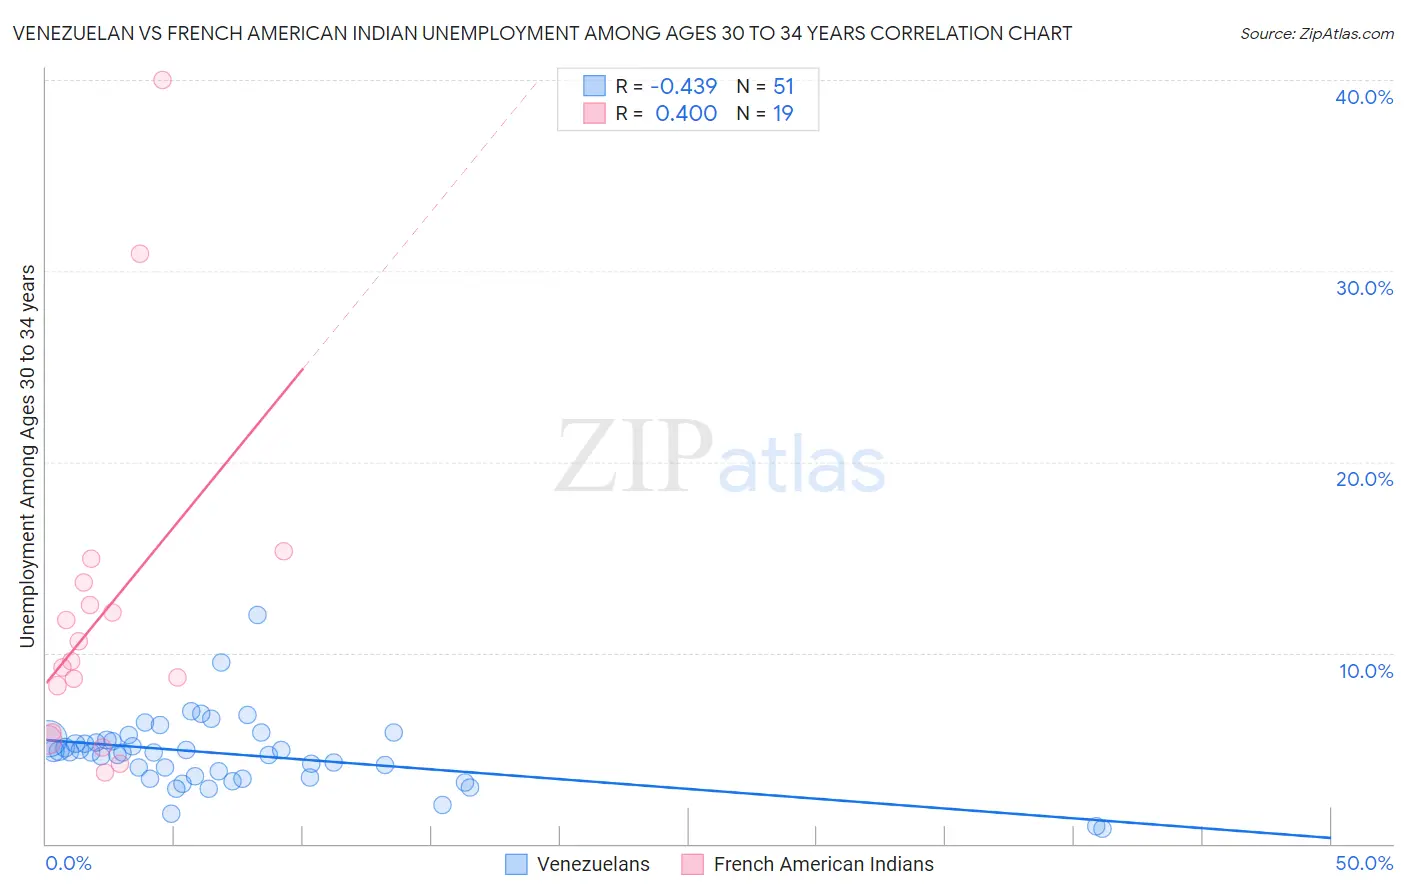 Venezuelan vs French American Indian Unemployment Among Ages 30 to 34 years